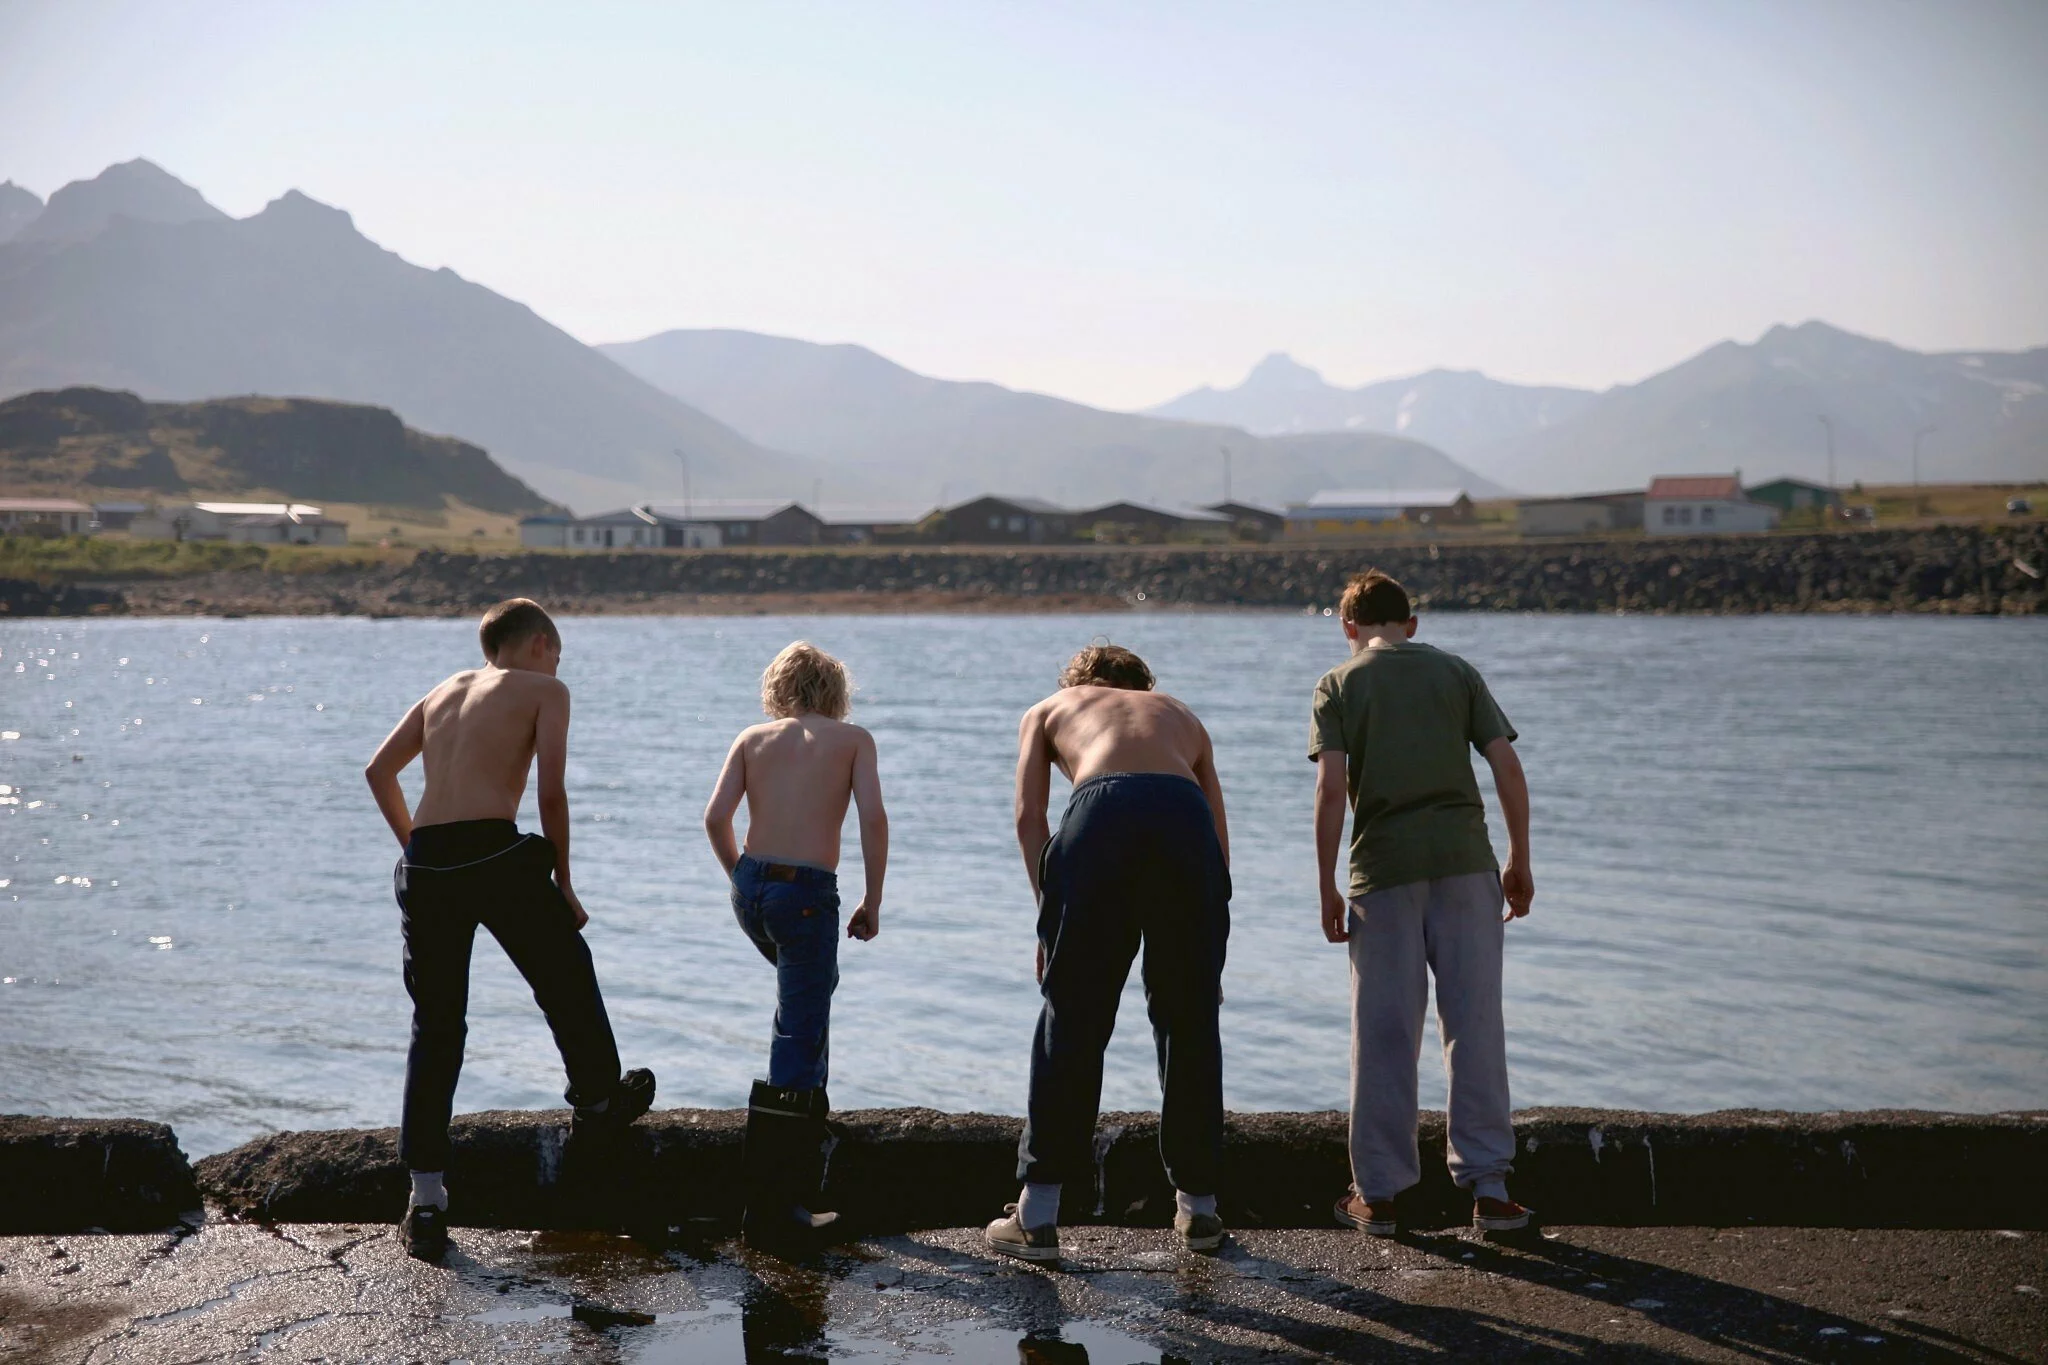 Boys on film: the young lads of Heartstone. (Photo by Roxana Reiss)